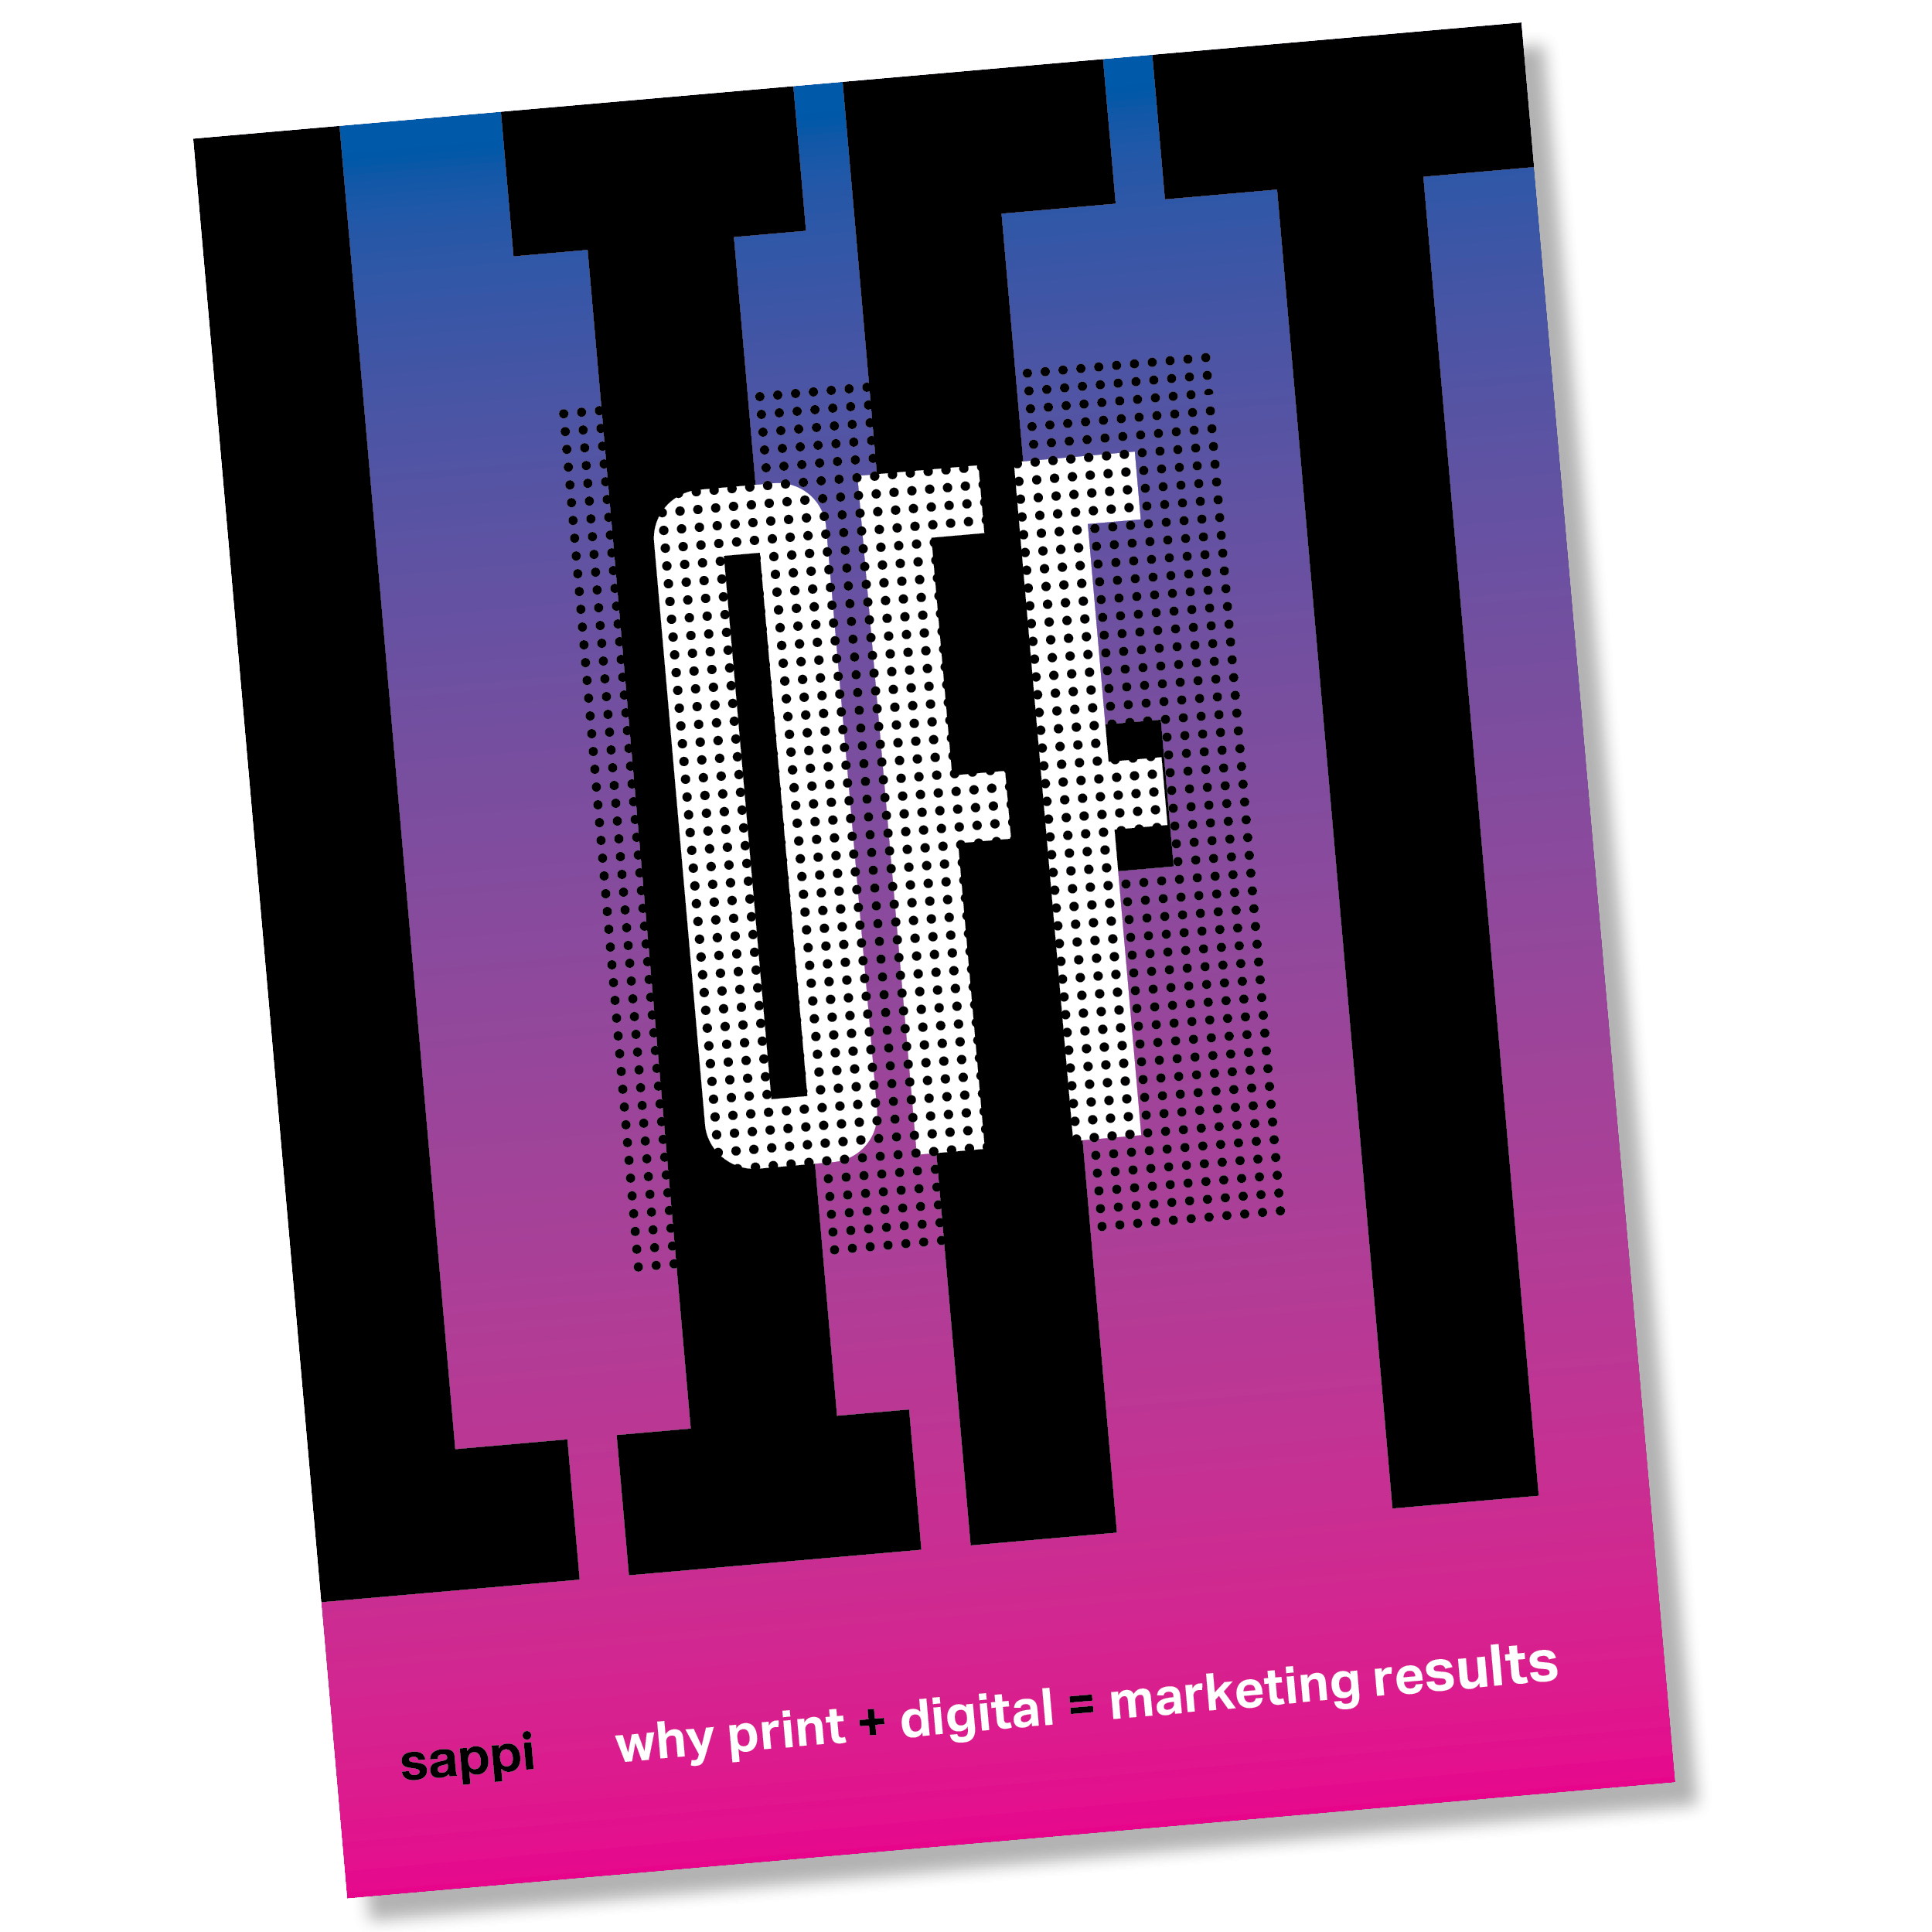 Lift off magazine cover transparent background